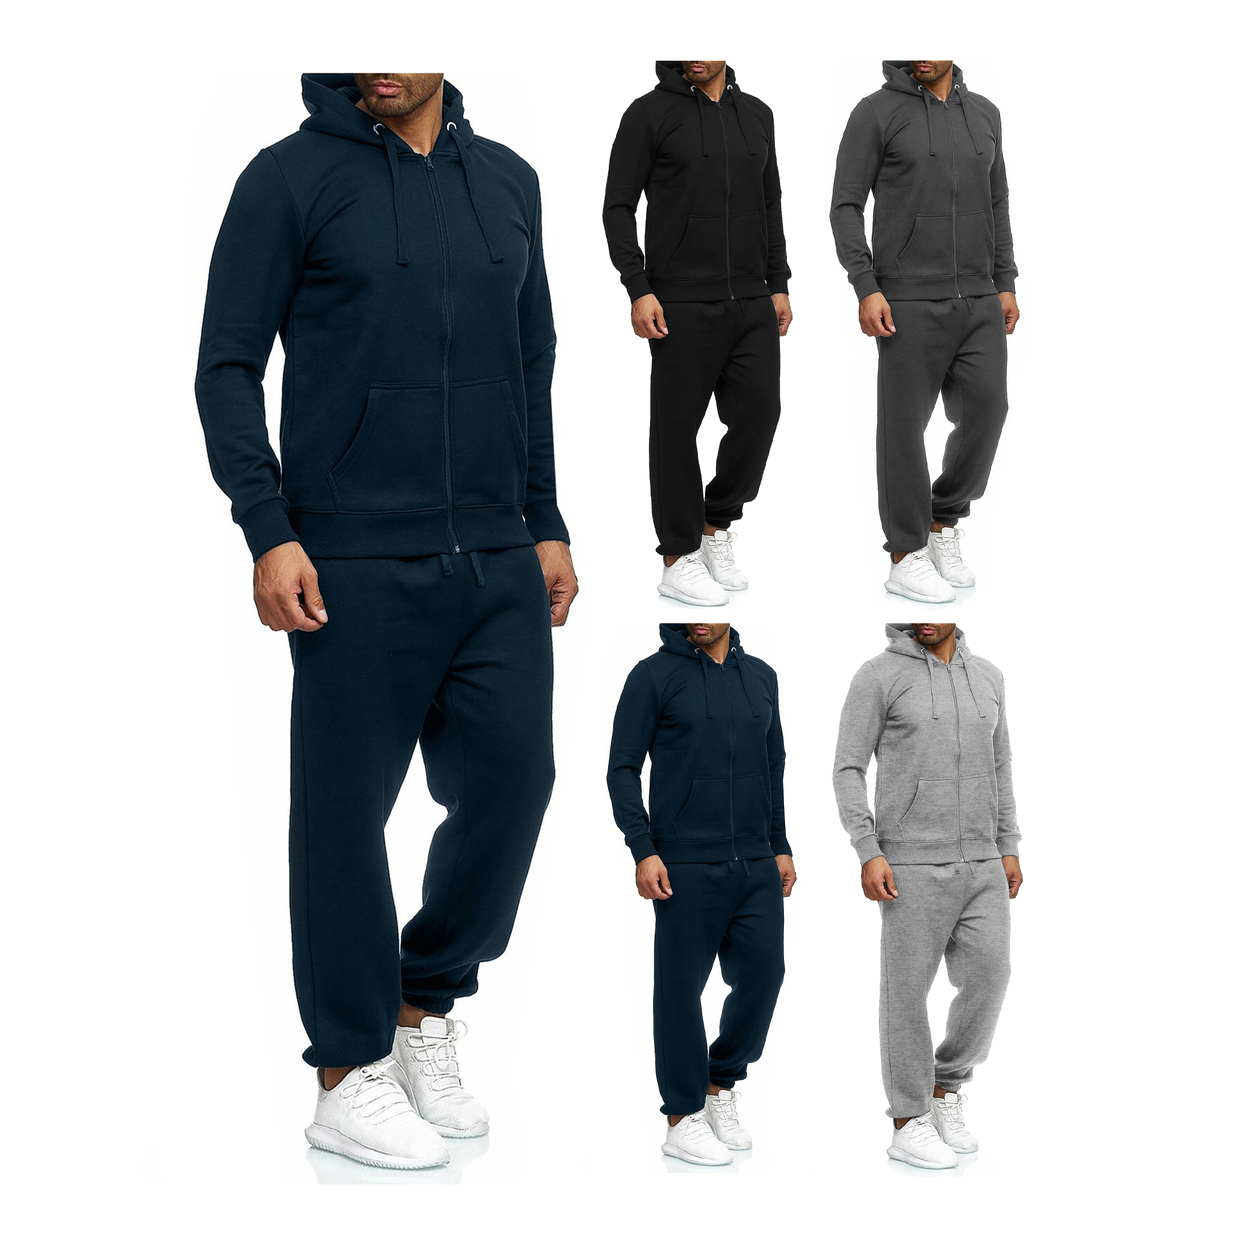 Men's Casual Big & Tall Athletic Active Winter Warm Fleece Lined Full Zip Tracksuit Jogger Set - Navy, 3xl